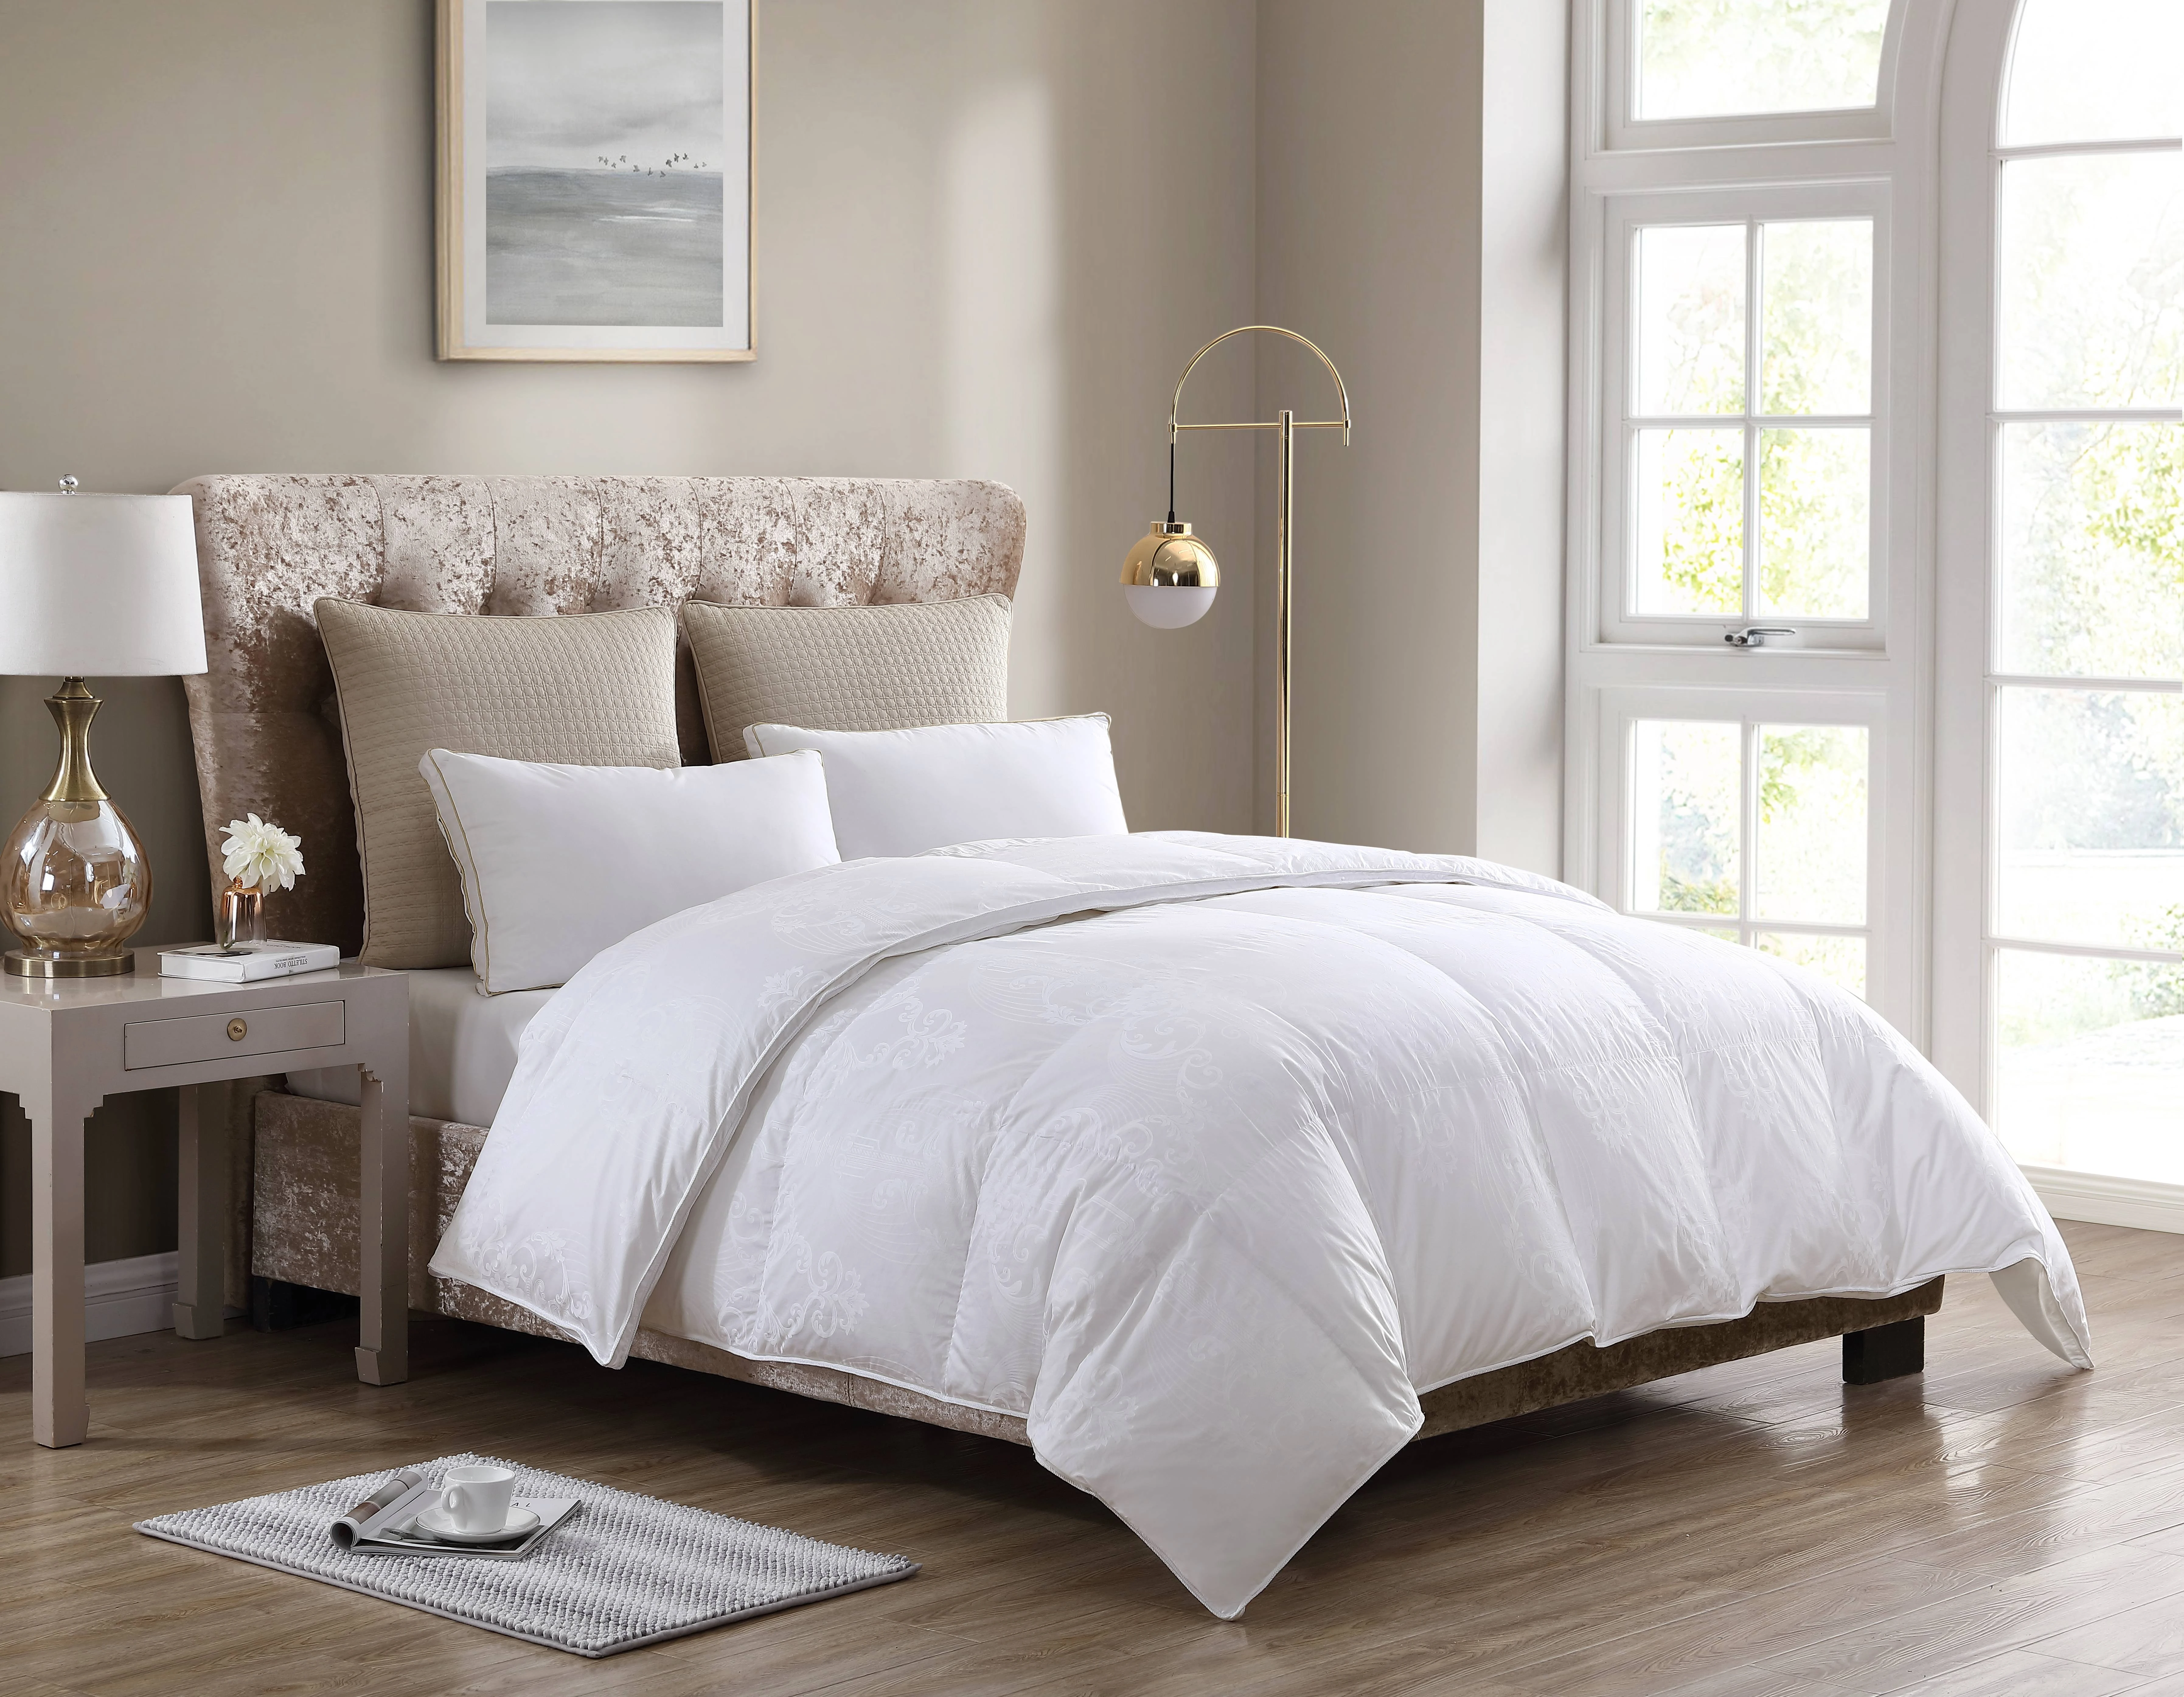 GAGA White Duck/Goose  Down and Feather Comforter/ Duvet/ Quilt in All Sizes